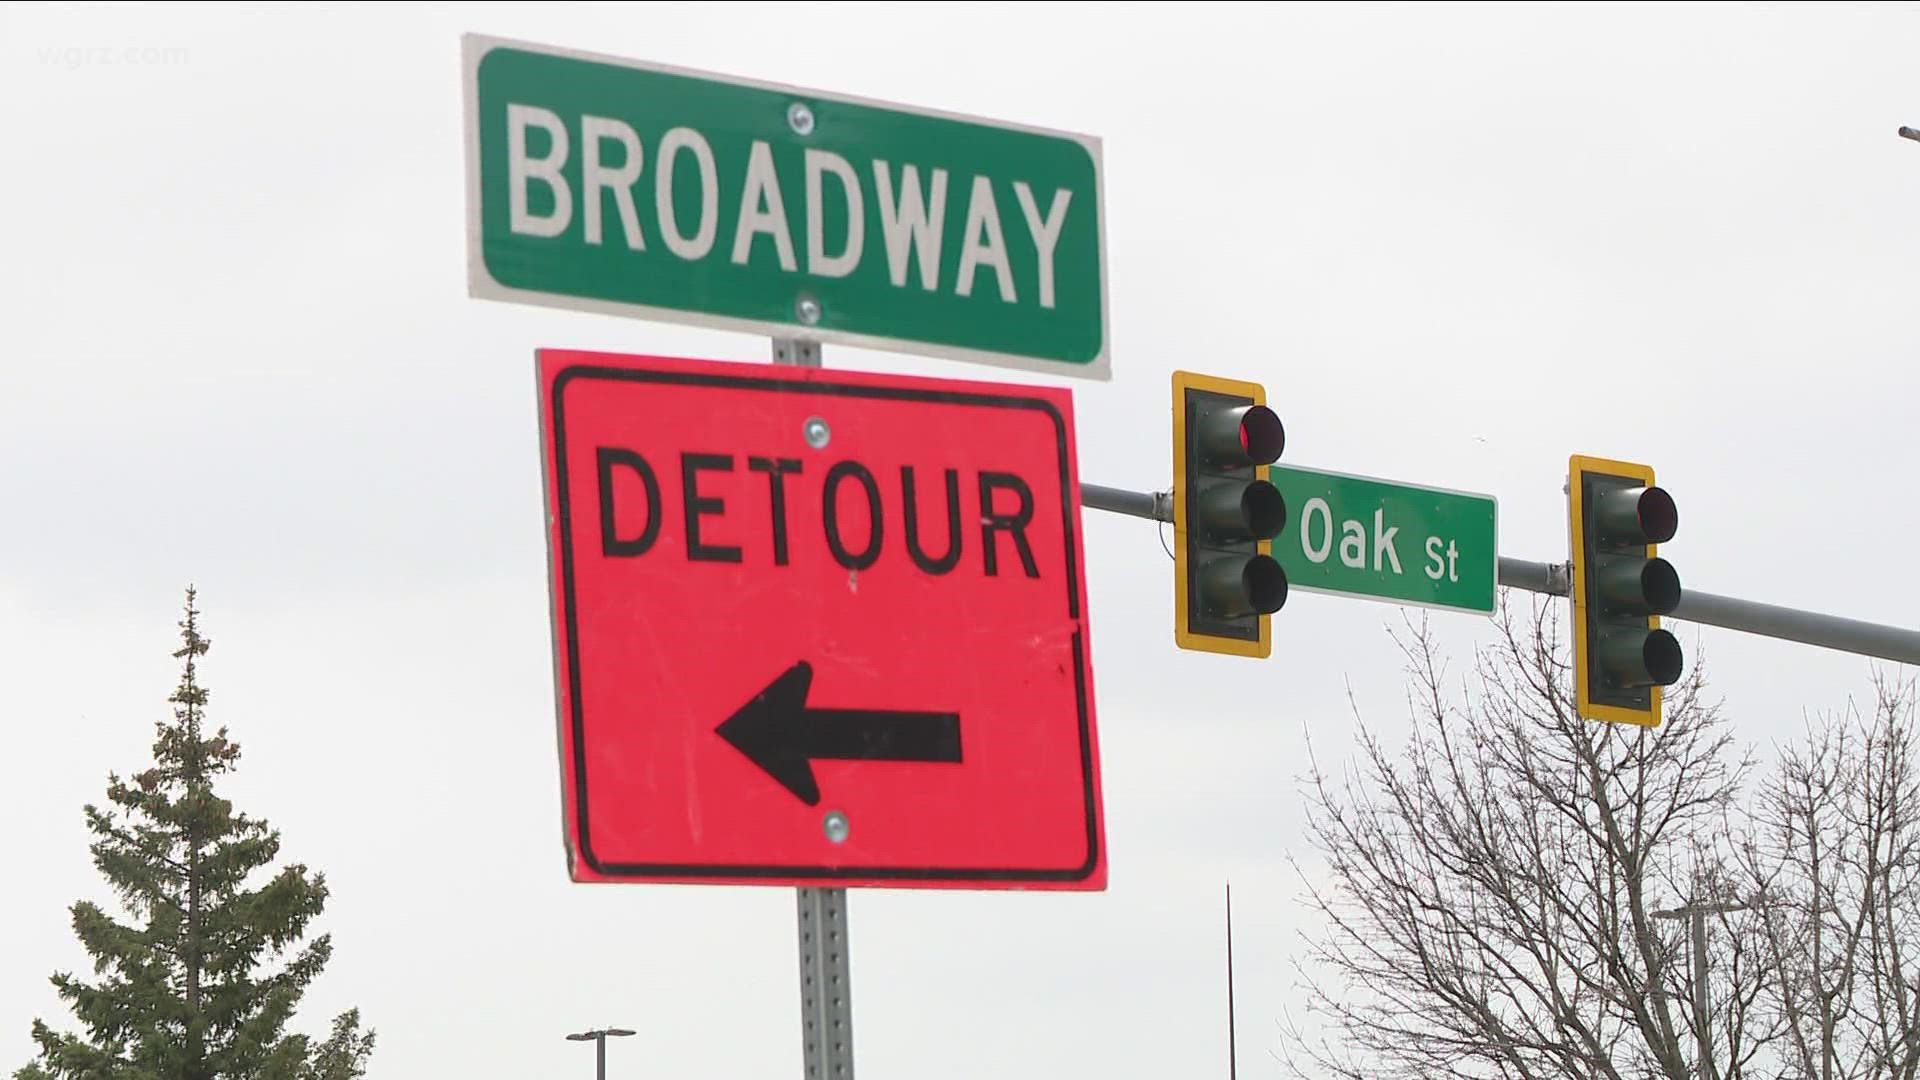 Broadway will be closed tomorrow between Elm St and Oak St. The work is expected to last up to eight months.